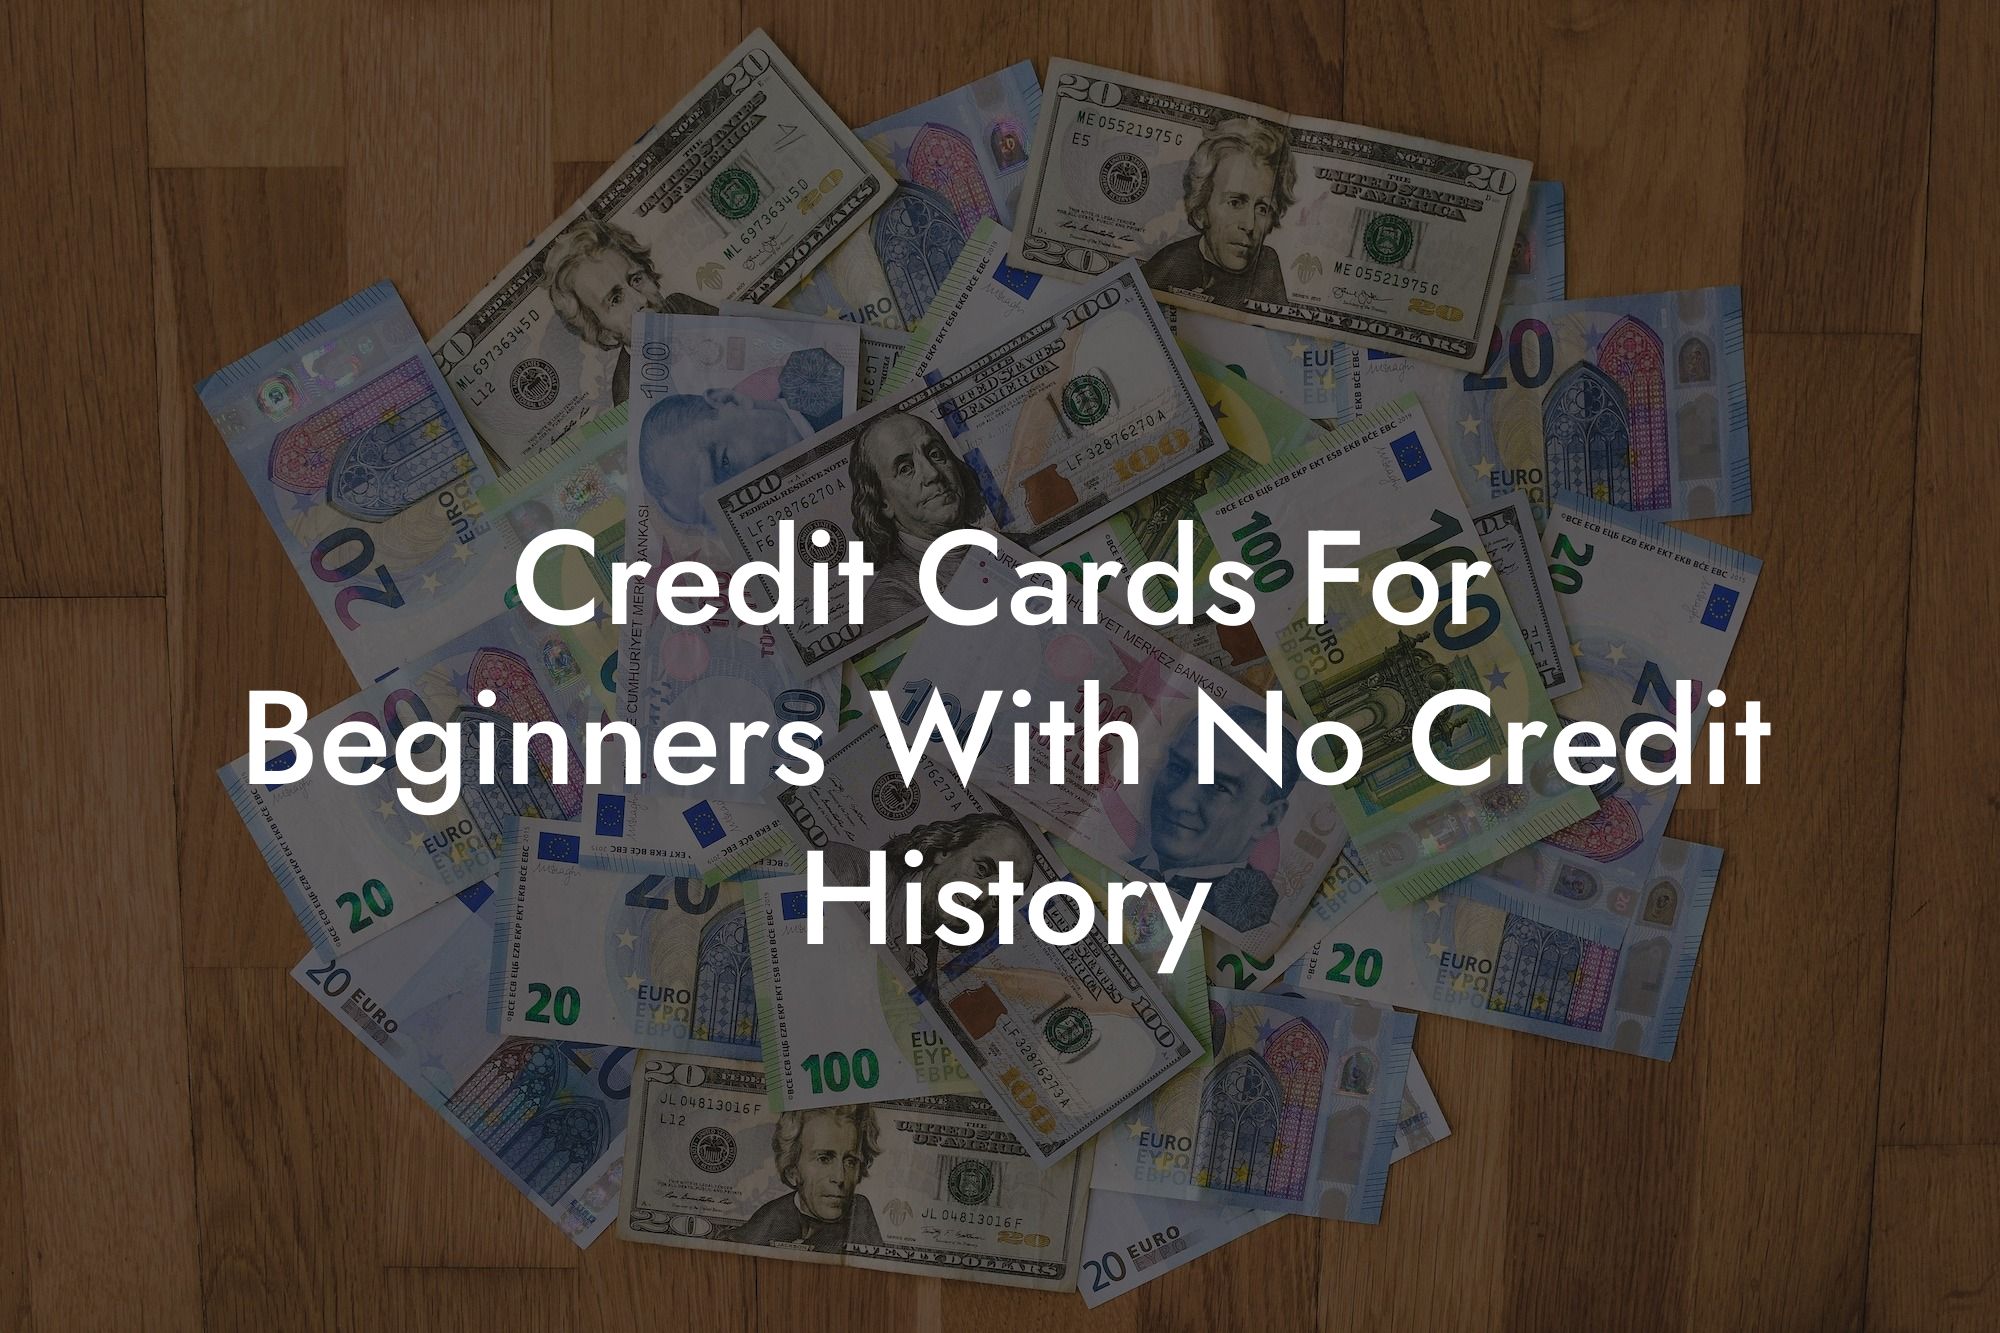 Credit Cards For Beginners With No Credit History